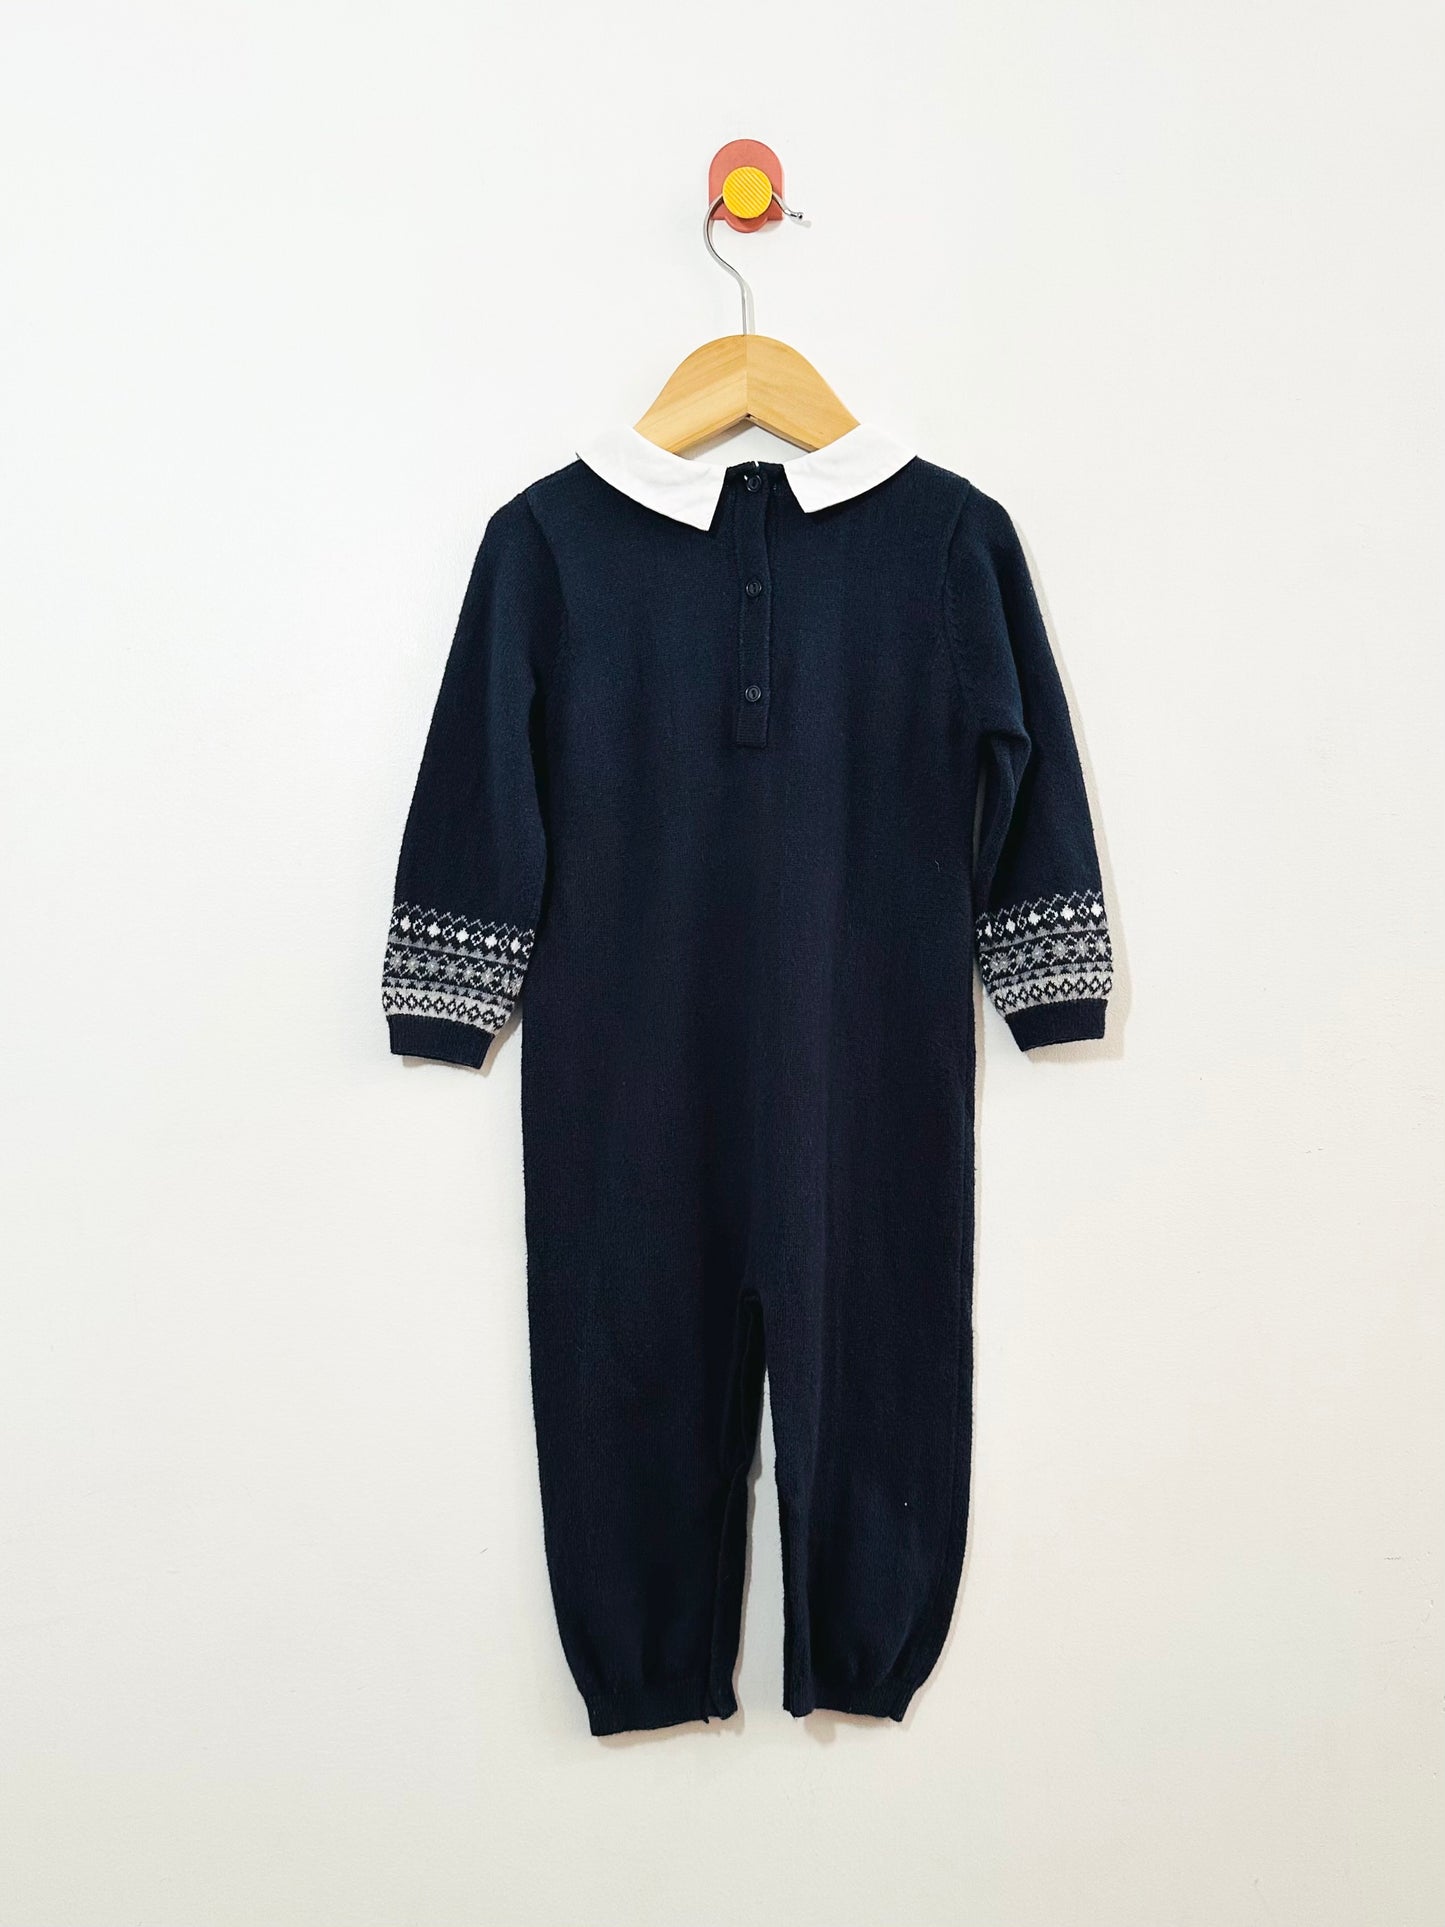 Little Youngster Knit Onesie / 18M